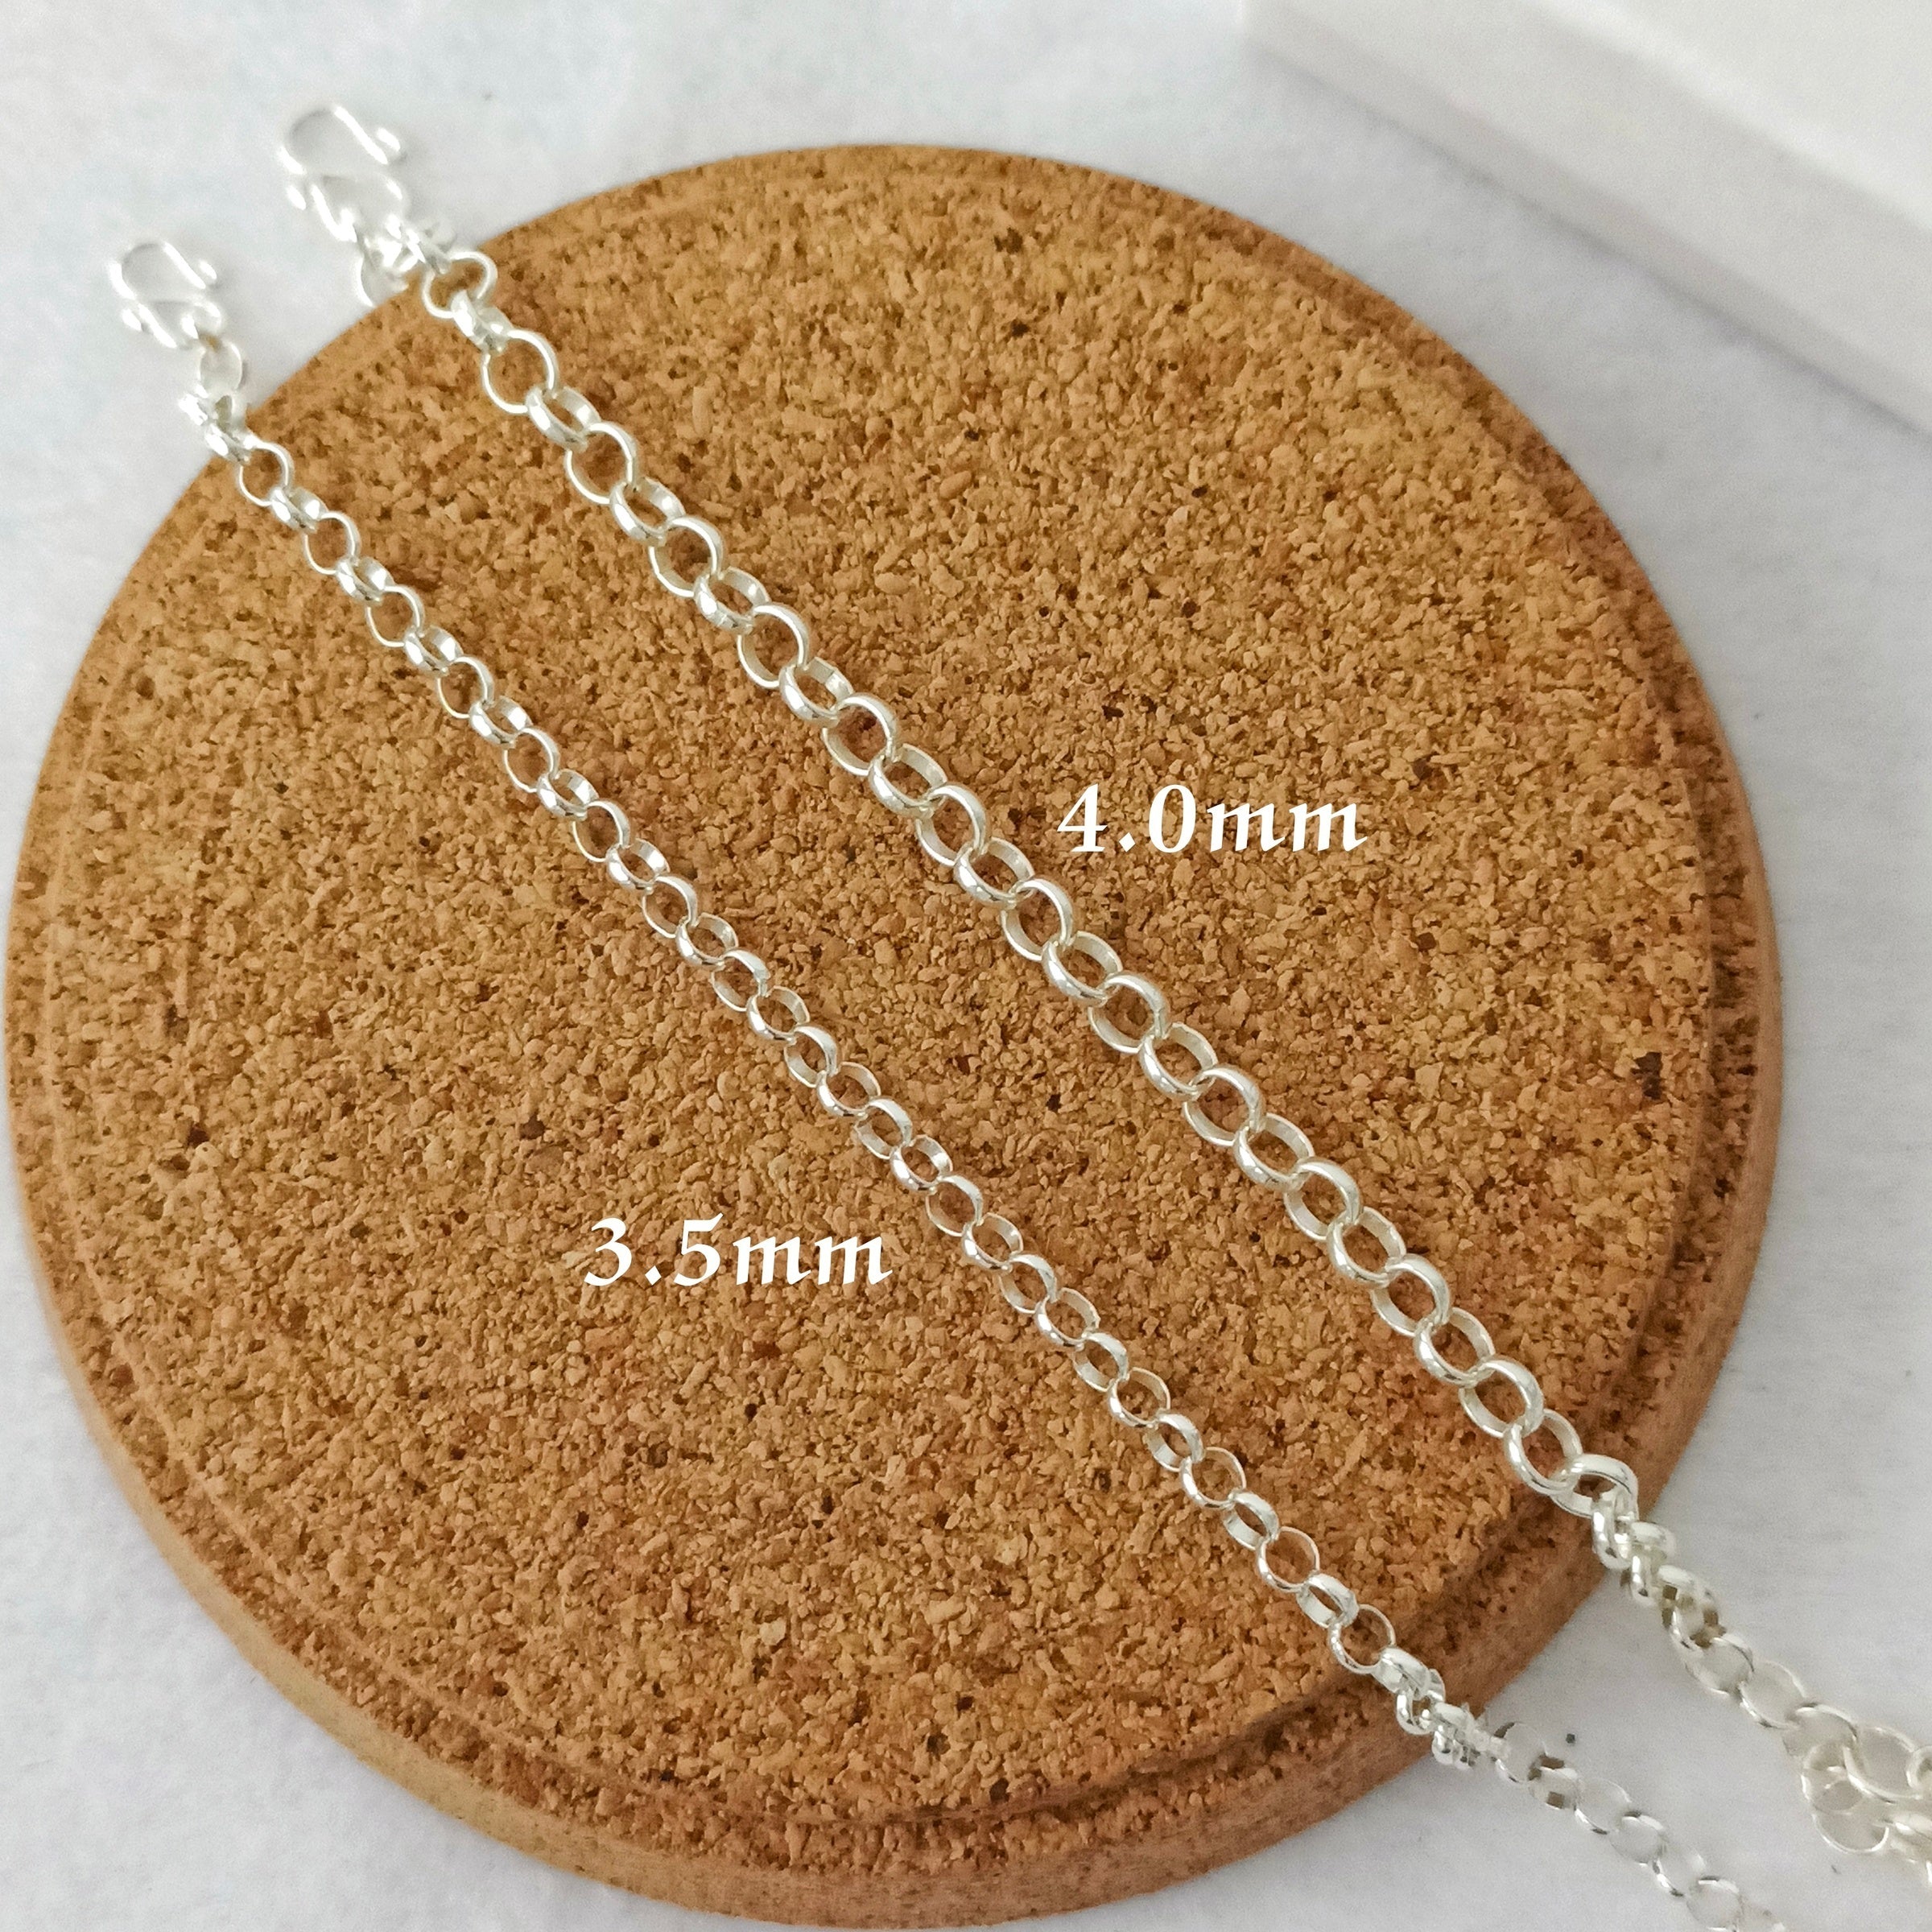 Empty Baby Anklet Chain (4.0mm / 3.5mm)